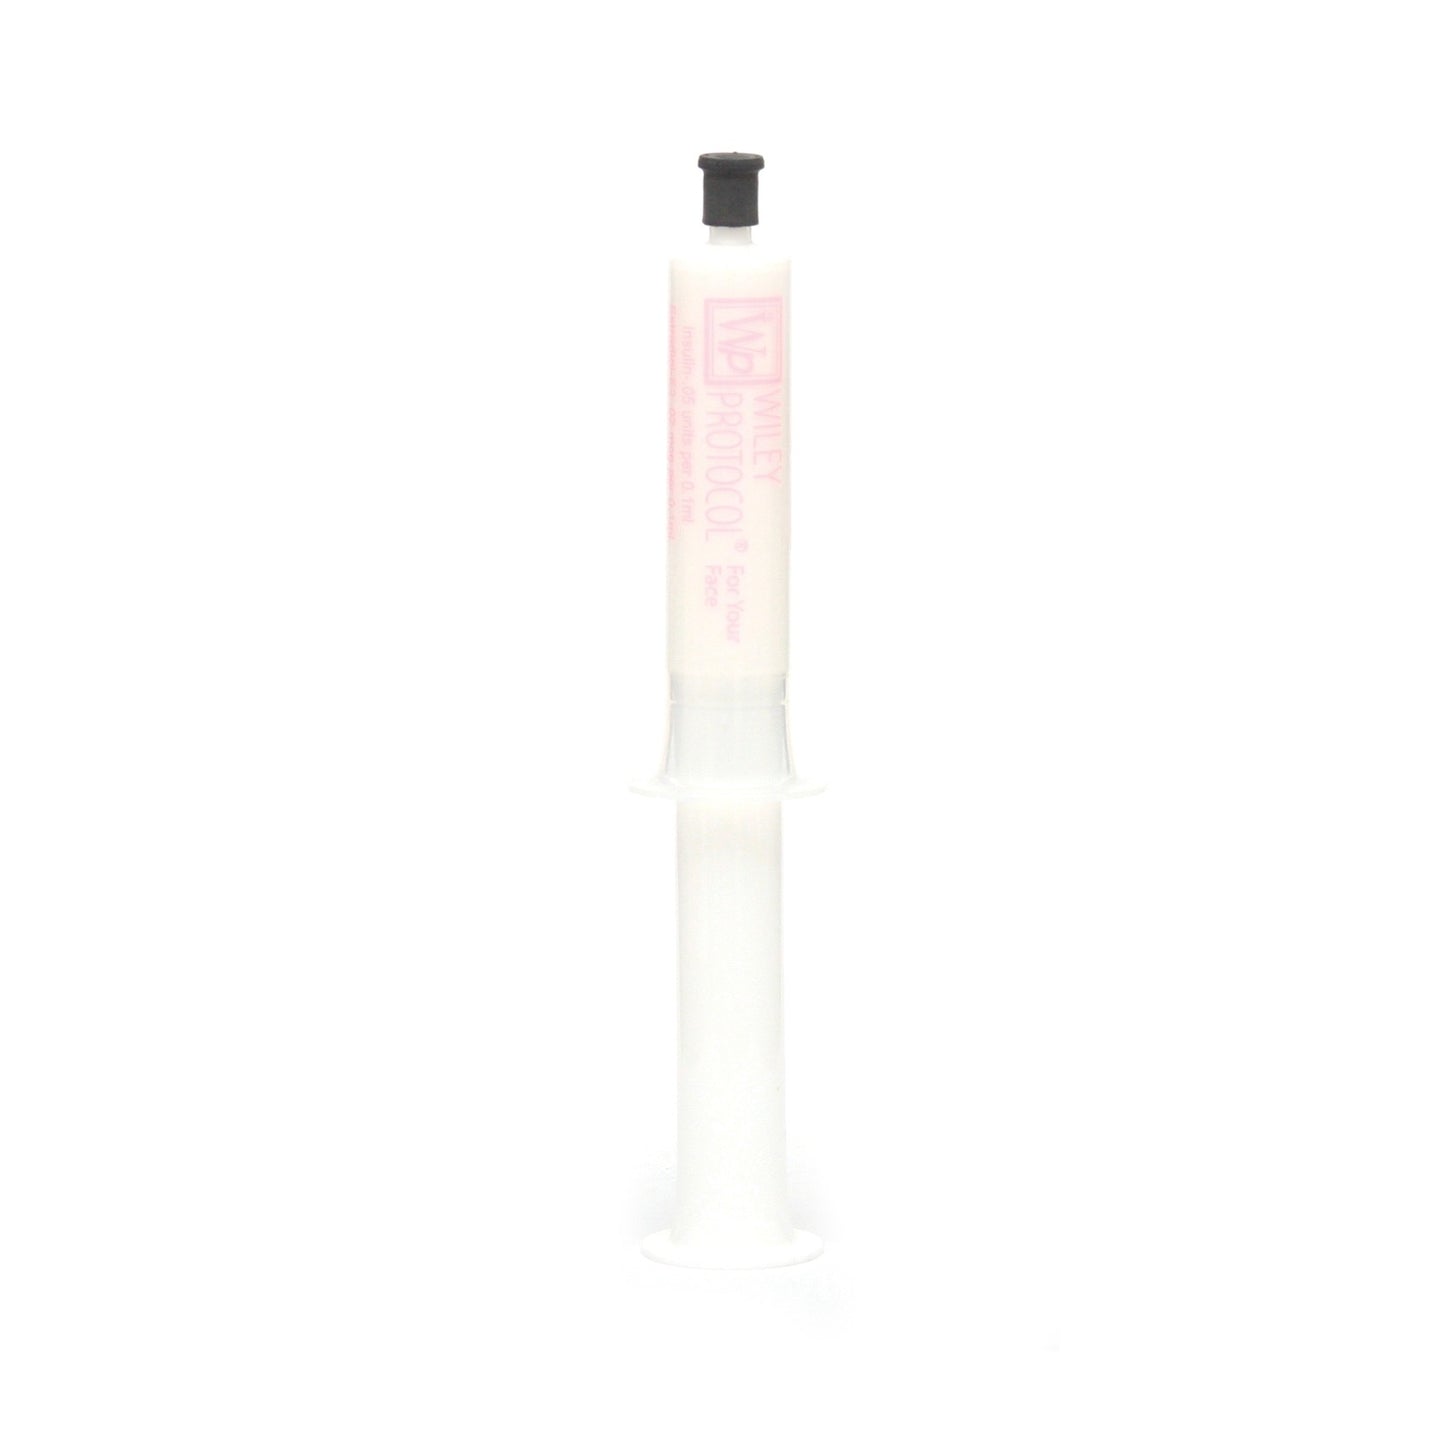 Face Crème Syringes - White/Pink (pack of 250)